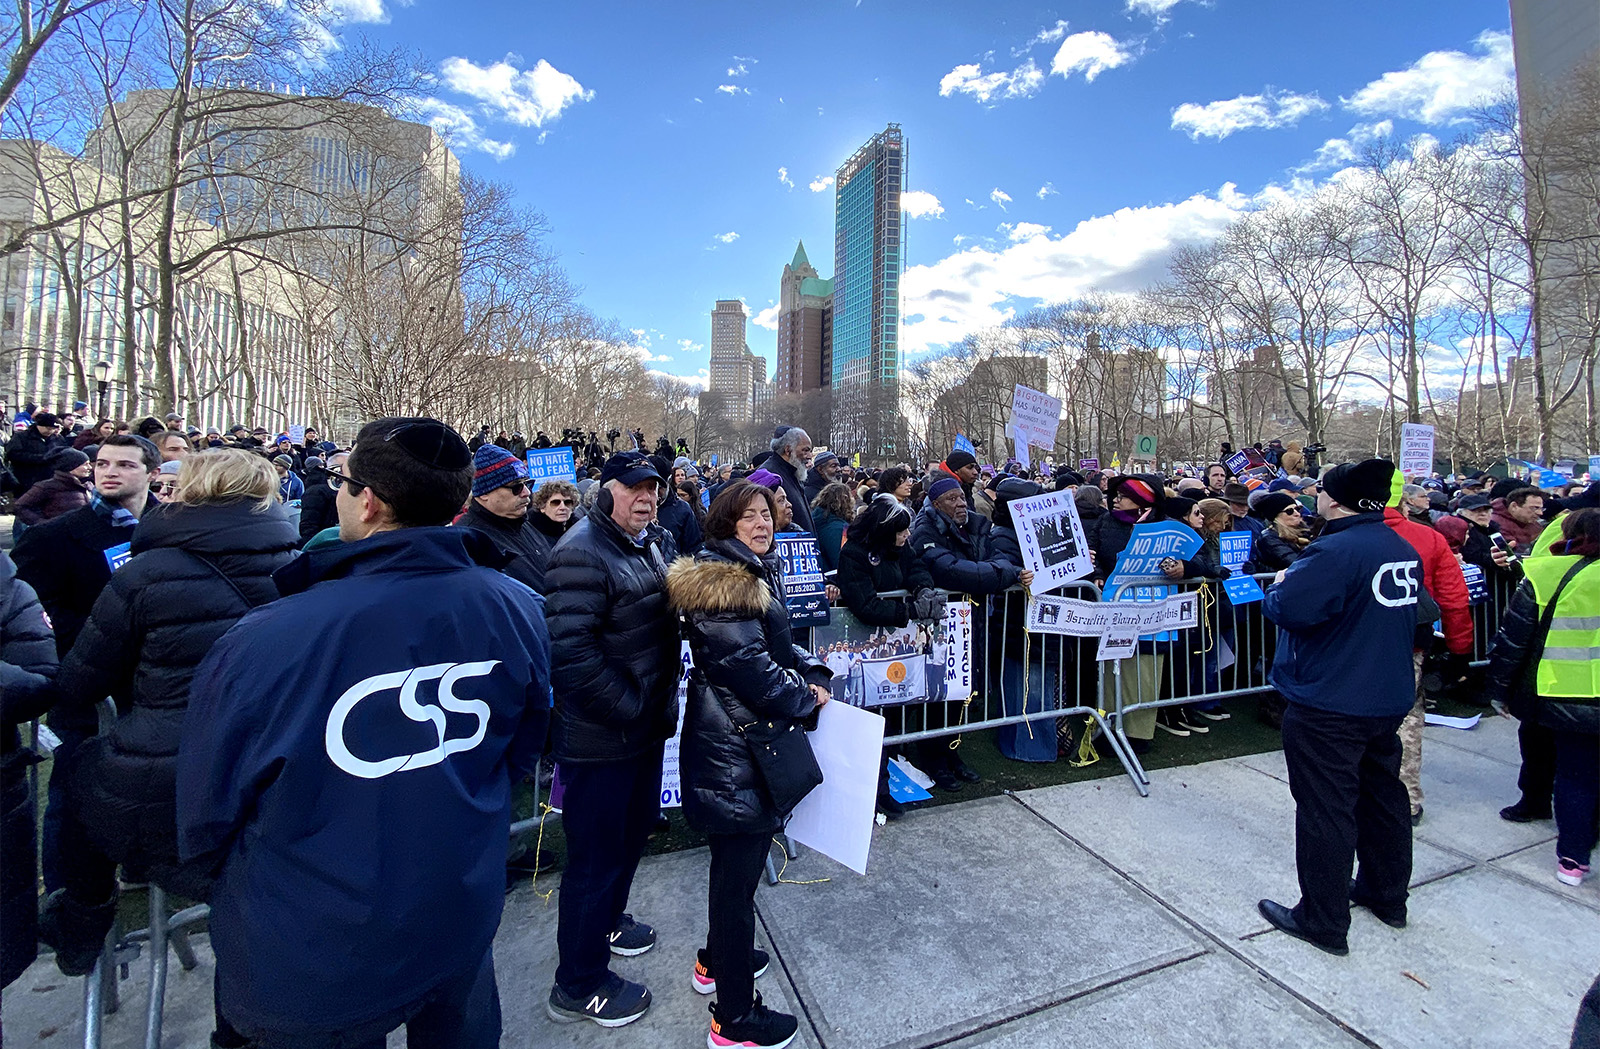 People attend the No Hate No Fear rally in New York, January 2020.  The main organizers of the event were the JCRC of New York, CSI and the UJA-Federation of New York.  The rally came after the attacks on Jewish communities in Jersey City, NJ and Monsey, NY.  Community Security Service volunteers provided on-site security.  Pastor Gil Monrose and the 67th Clergy Council were also present, which served as a landmark moment as all three organizations marched across the Brooklyn Bridge, leading to the formation of the Interfaith Security Council.  Photo courtesy of CSS